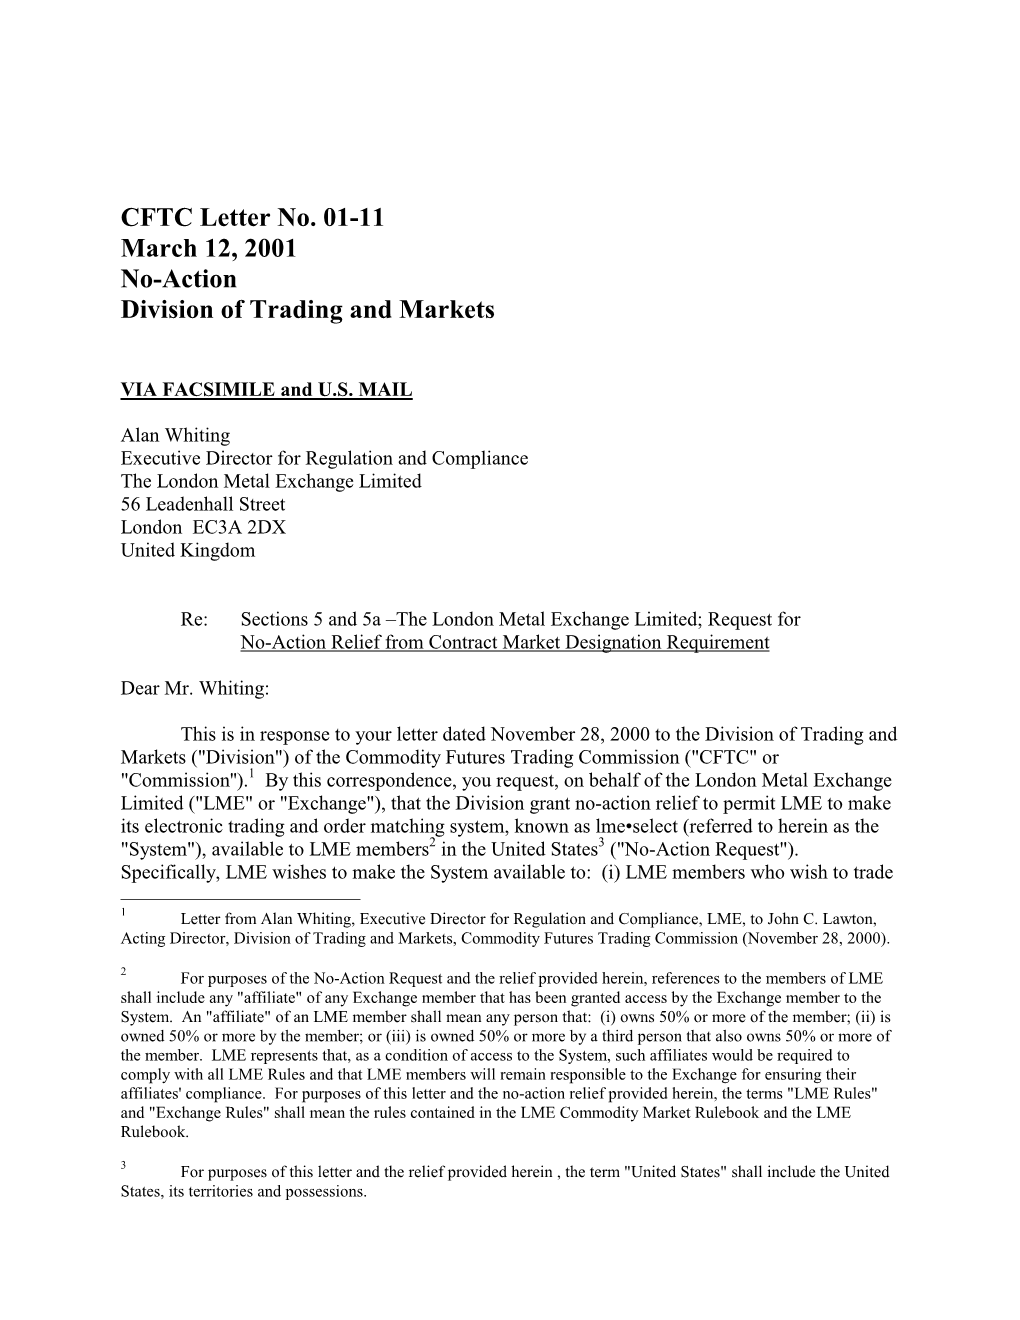 CFTC Letter No. 01-11 March 12, 2001 No-Action Division of Trading and Markets